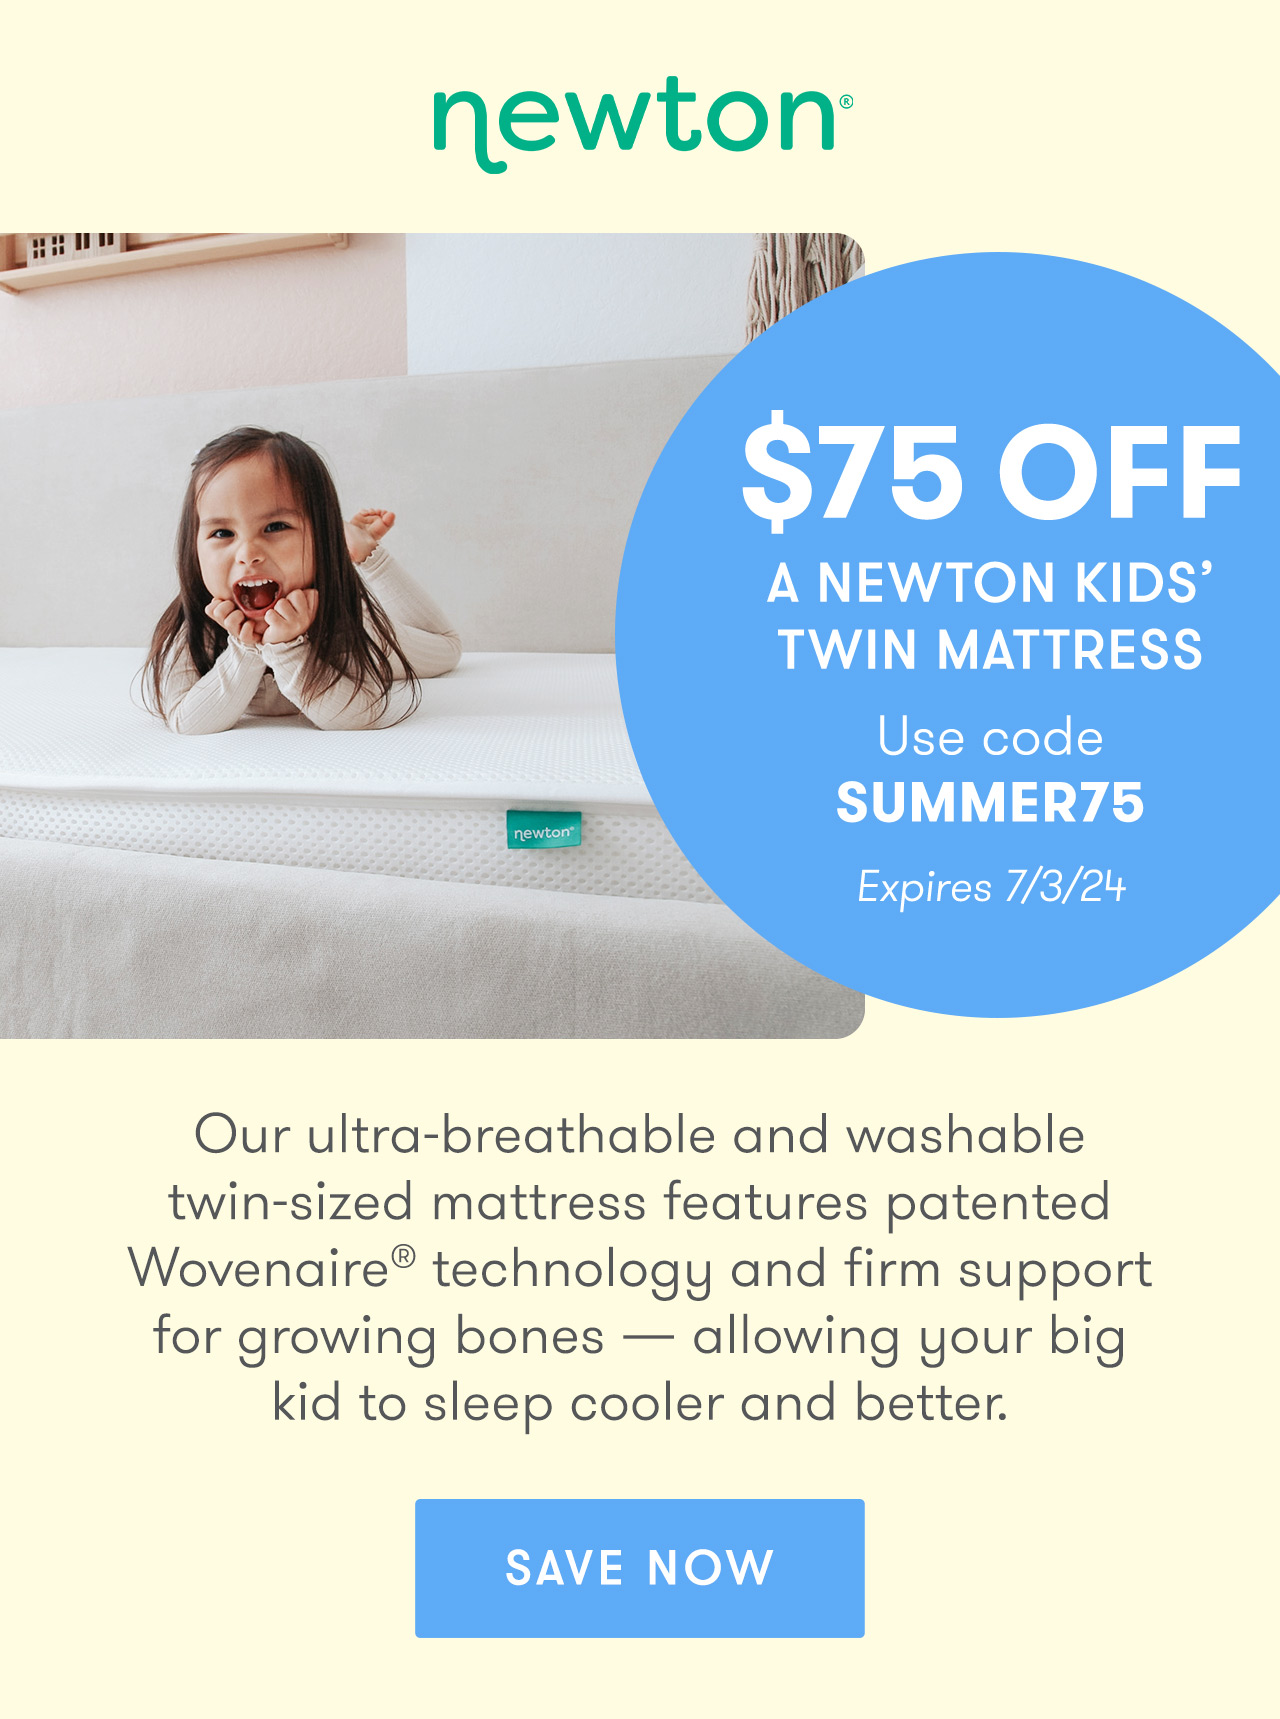 Save $75 on a Newton Kids' Twin Mattress with code SUMMER75